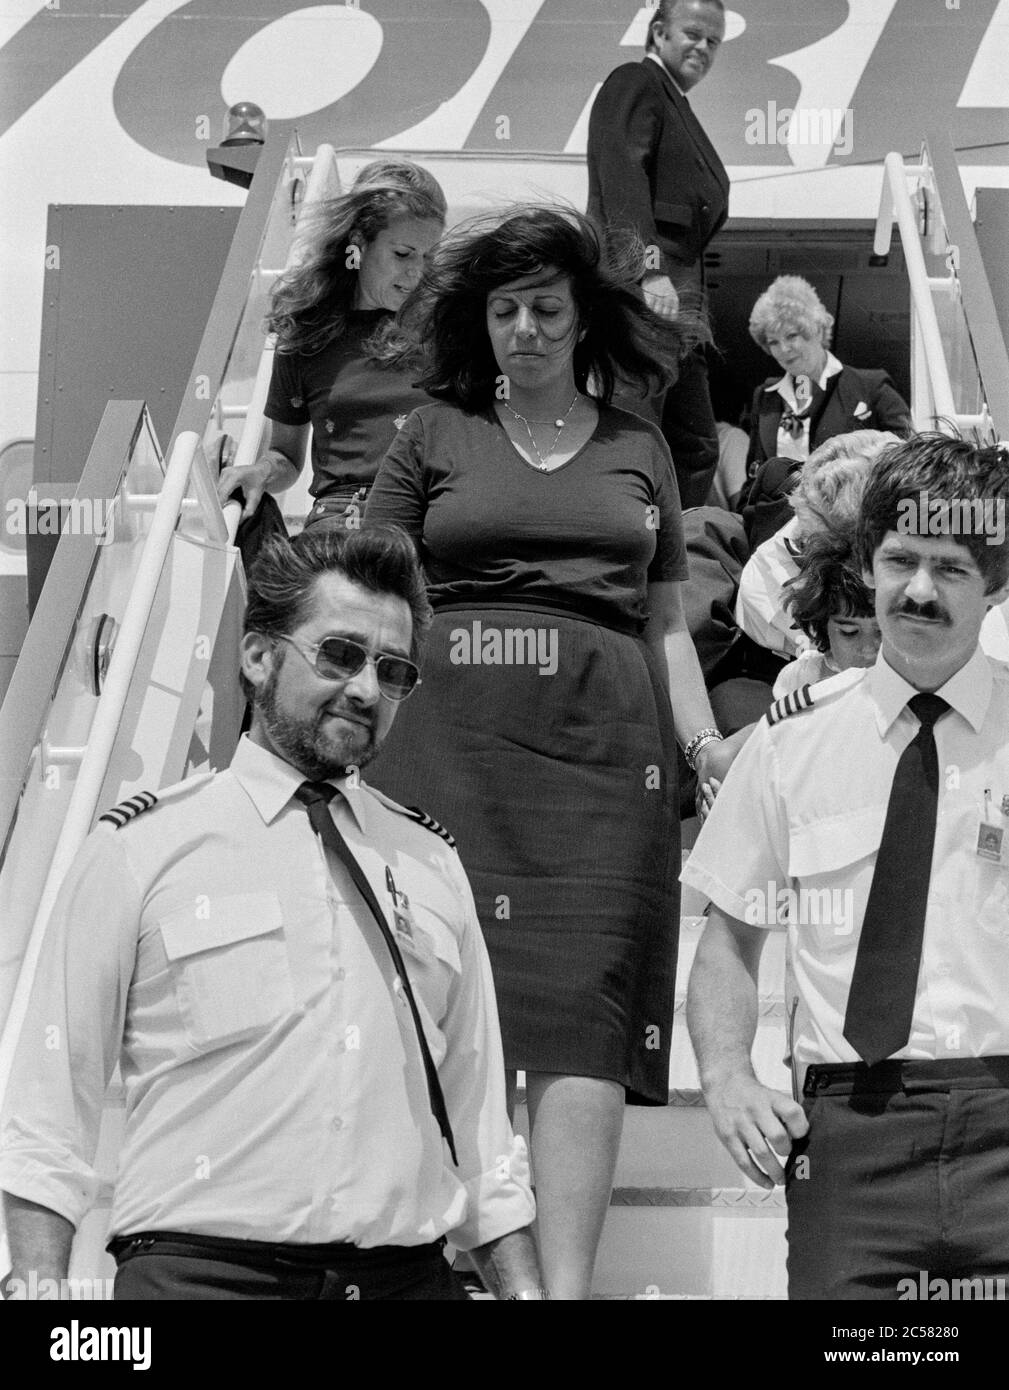 Greek socialite and business woman and heiress to the Onassis fortune Christina Onassis arriving at London's Heathrow Airport in July 1983. Stock Photo